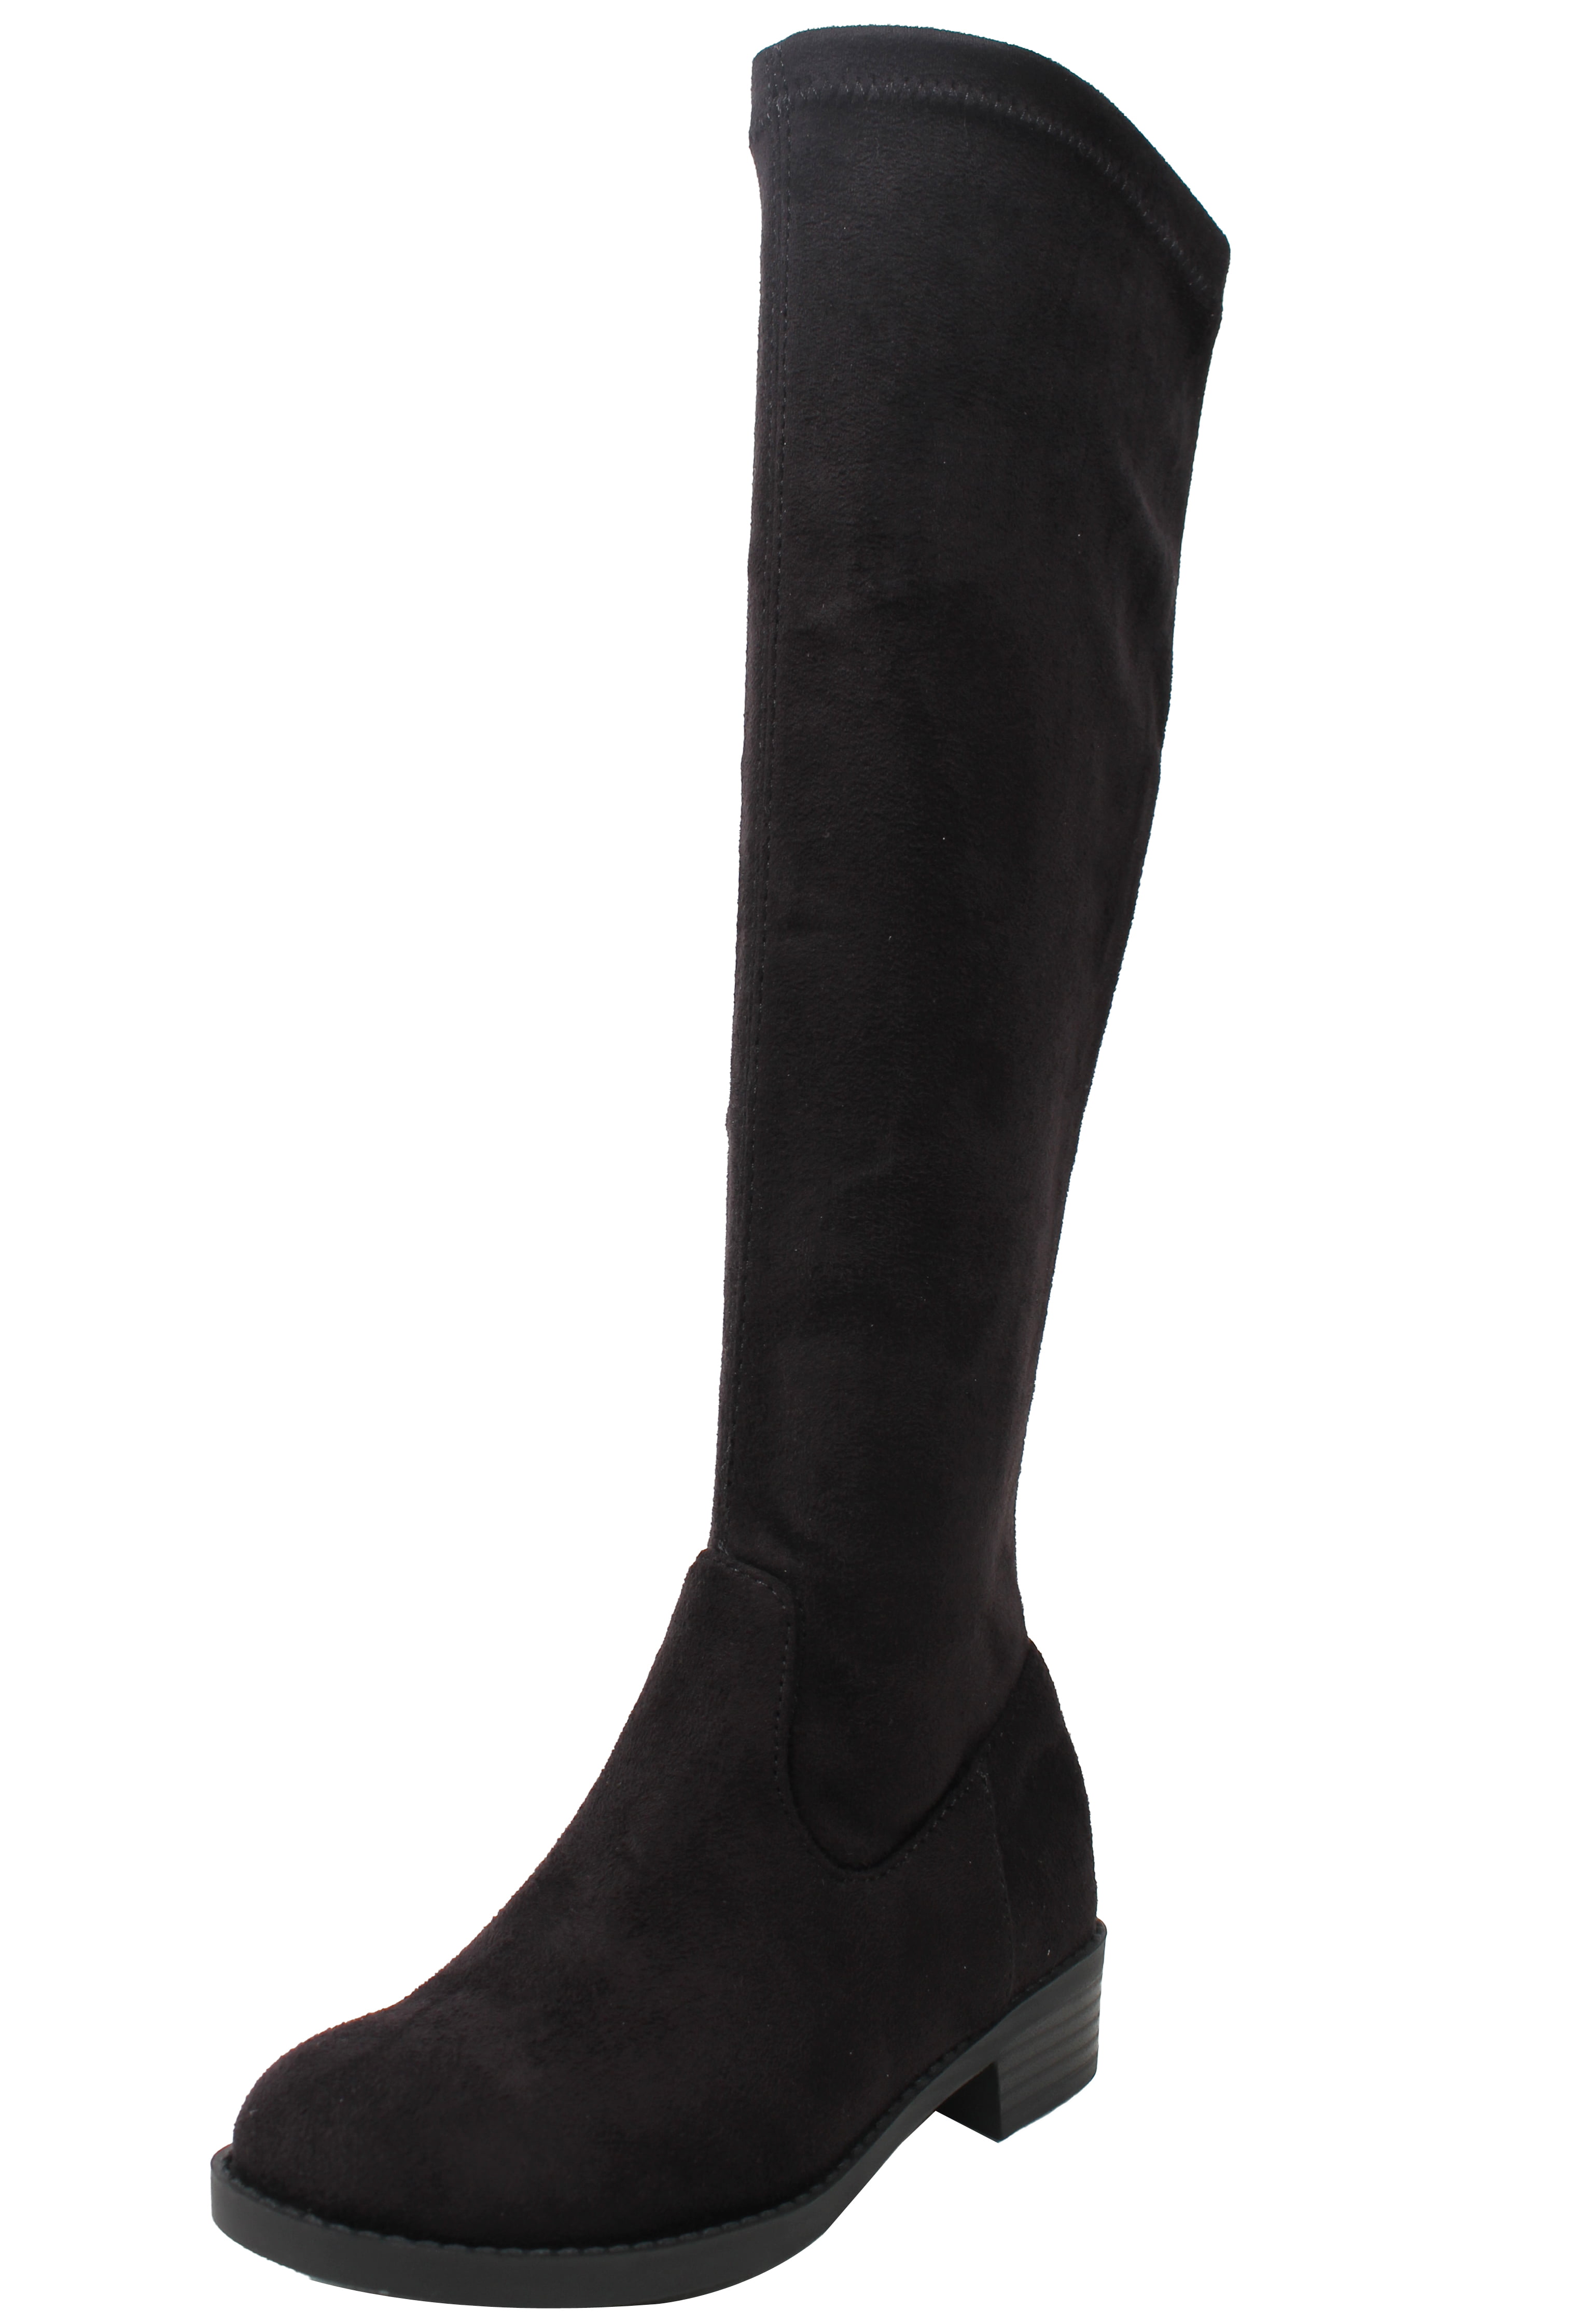 black knee high boots for kids